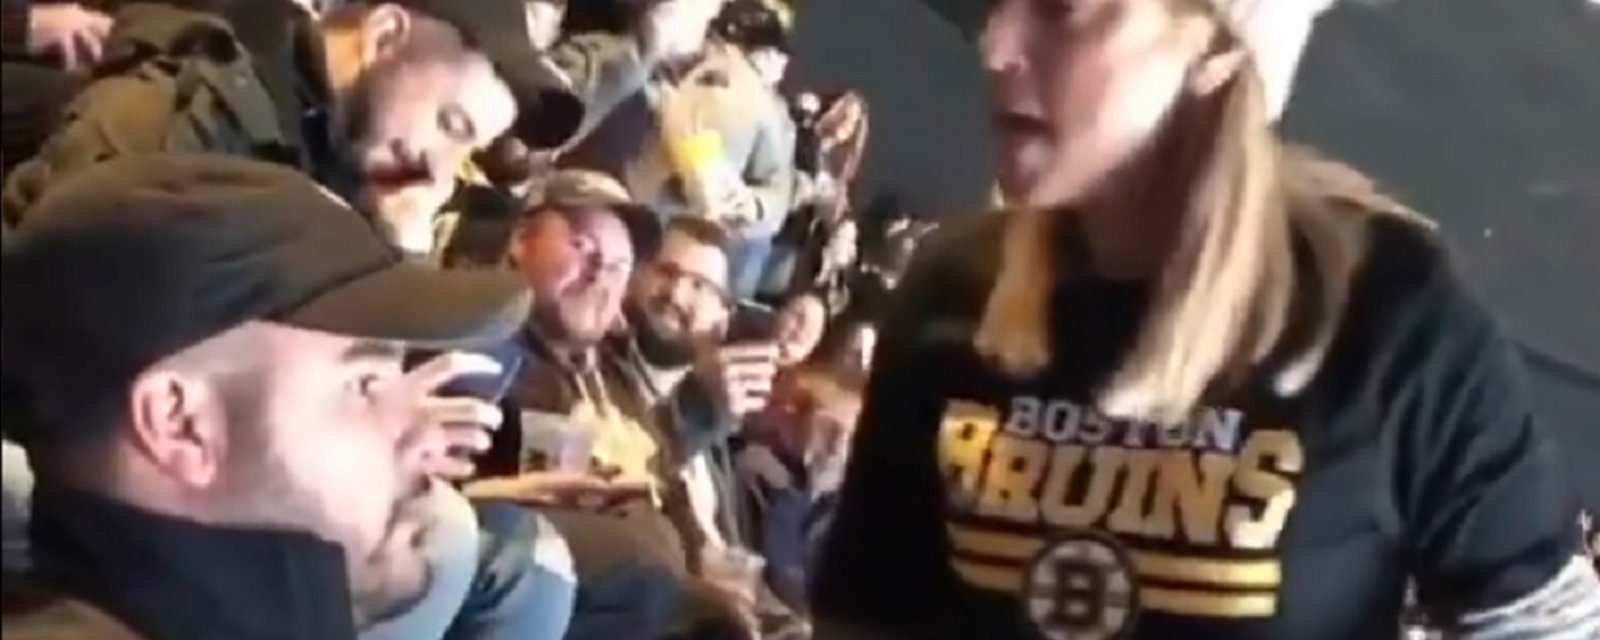 Bruins fan goes mental after someone spills food on her at the game.